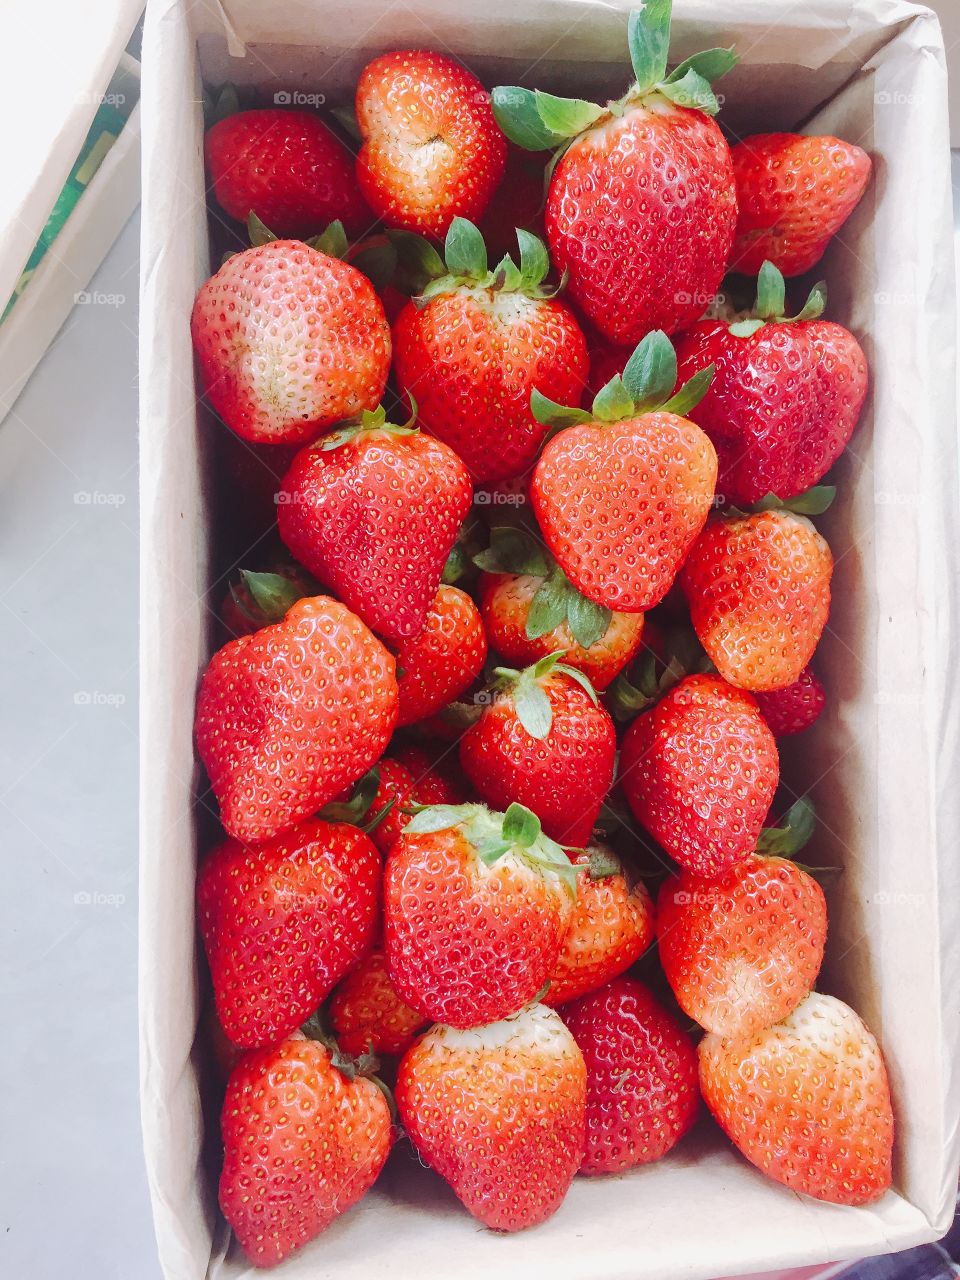 Strawberries in Vietnam. Awesome!!!